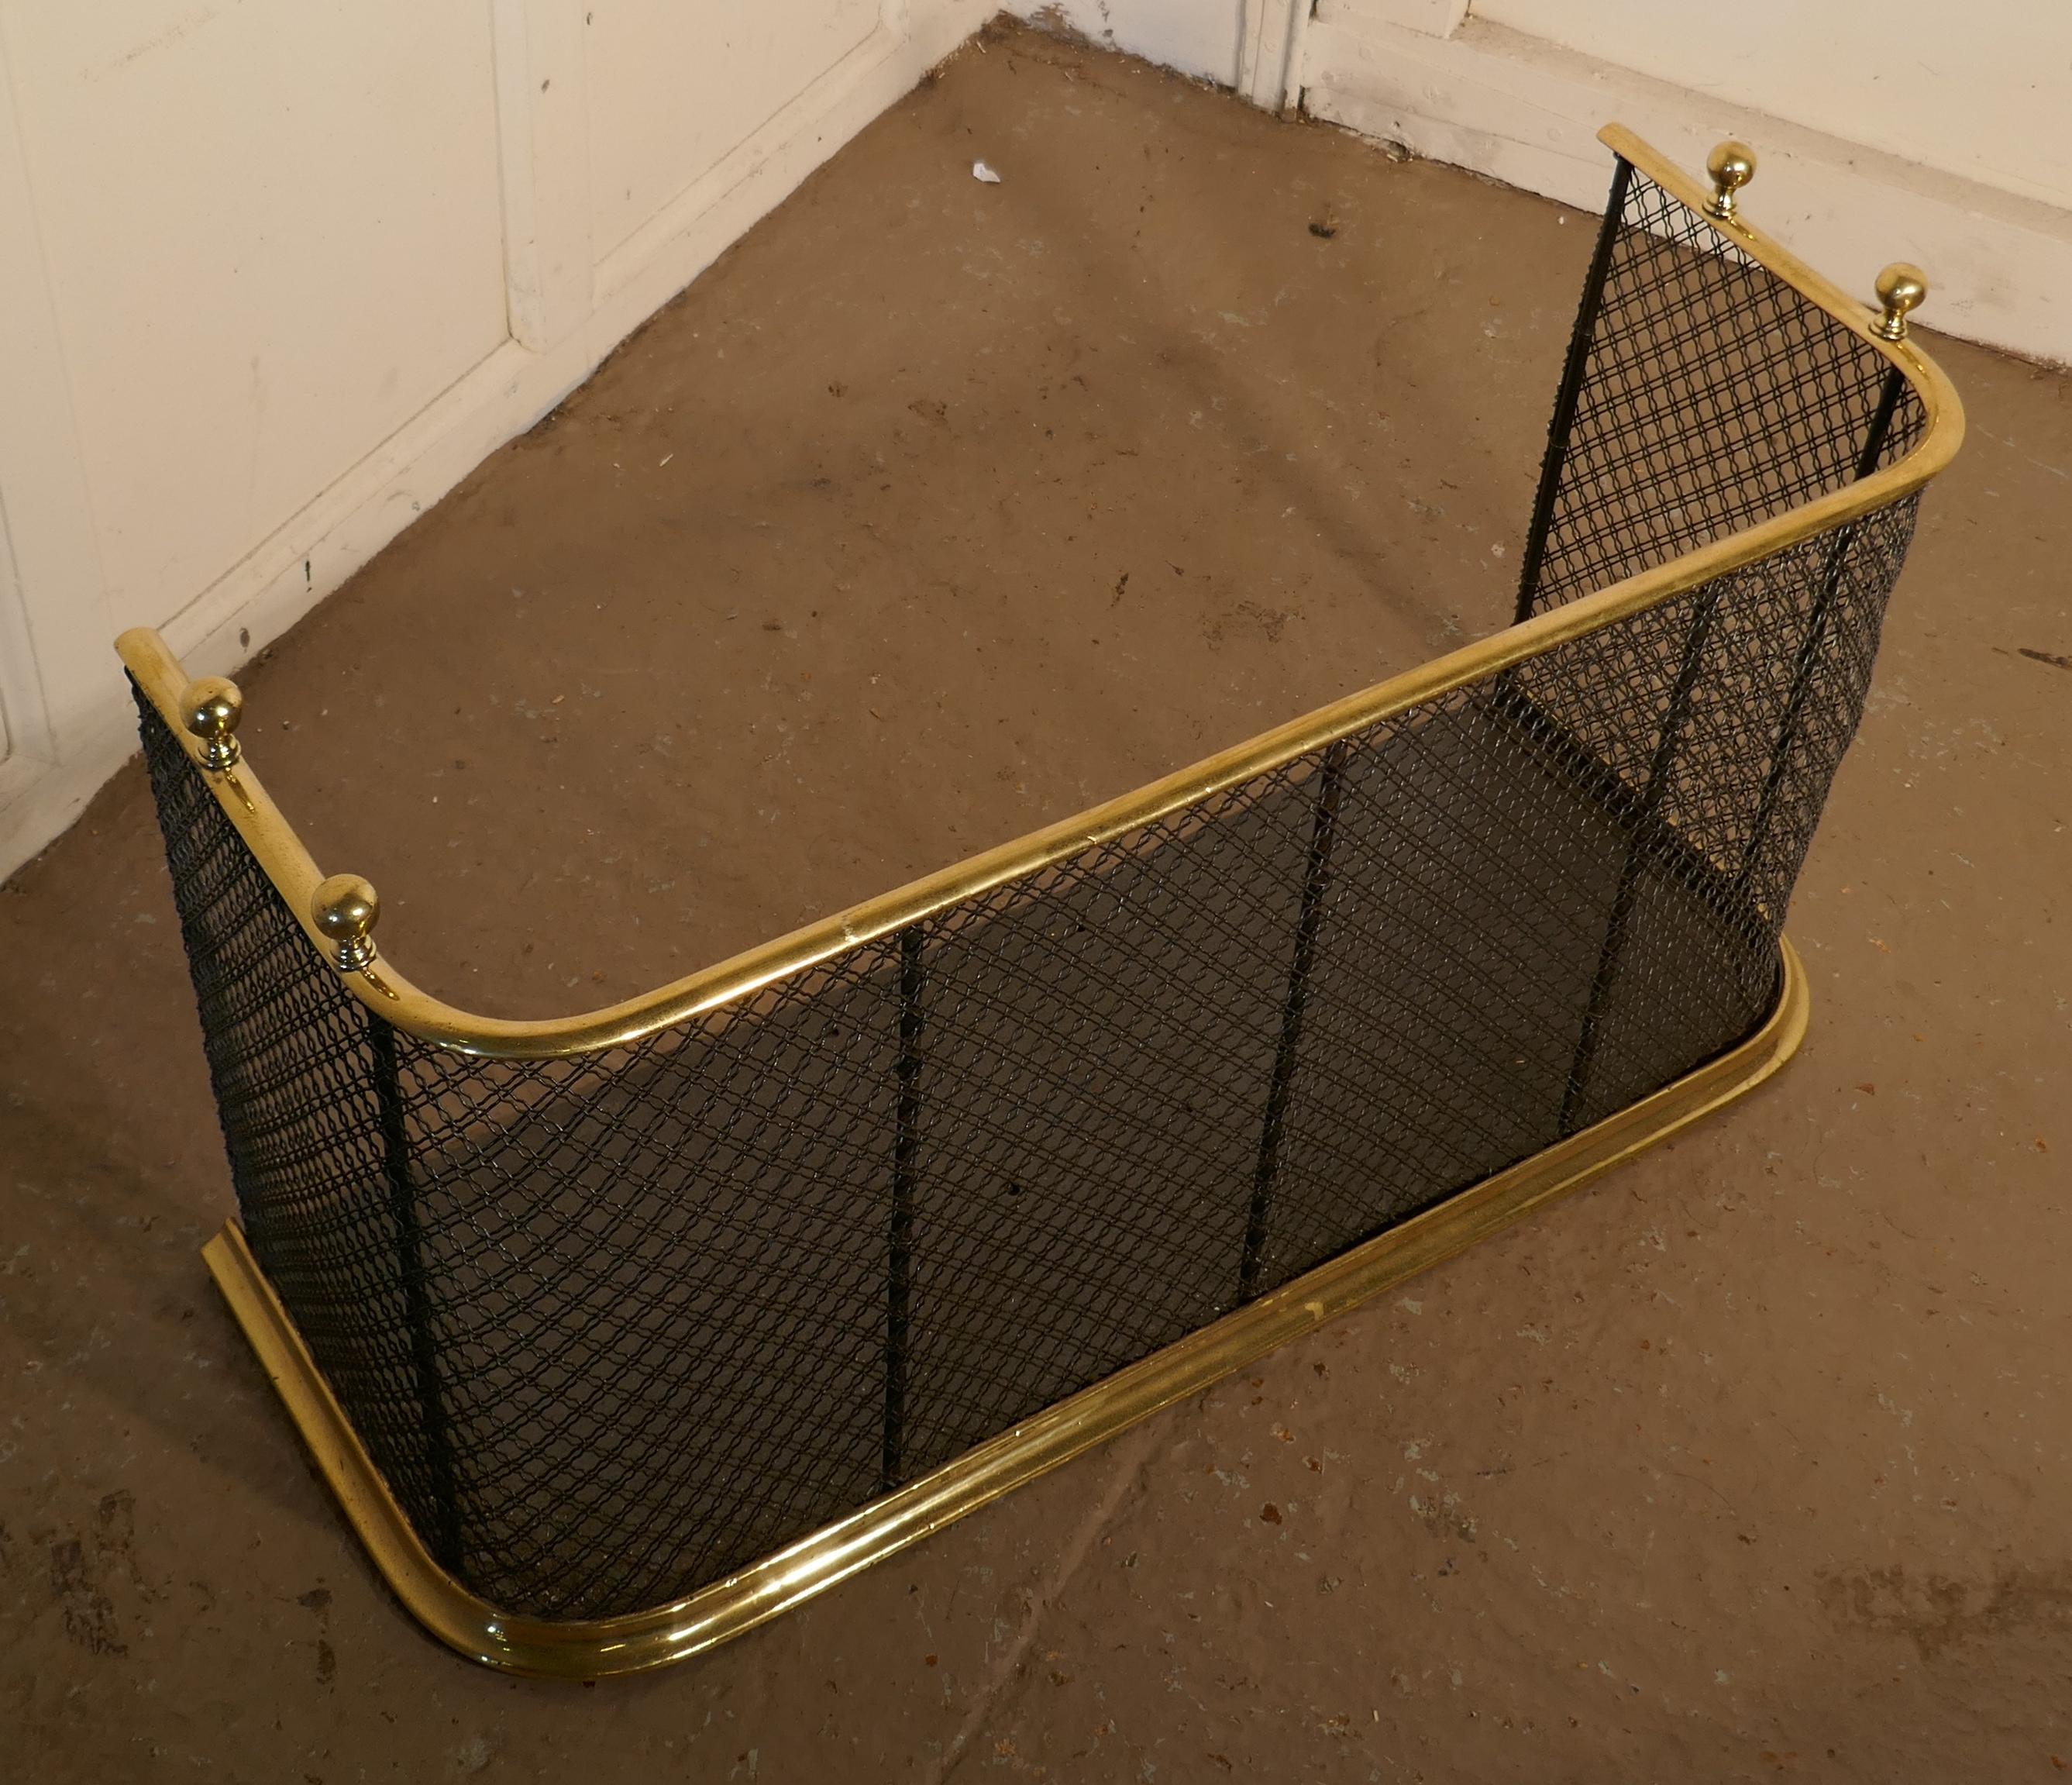 A Victorian brass and iron fender or fireguard
 
A Victorian antique fire guard often known as a Club Fender, the iron guard has wire mesh and brass rails top and bottom, it has brass knobs on the top, the fender is in good all round condition